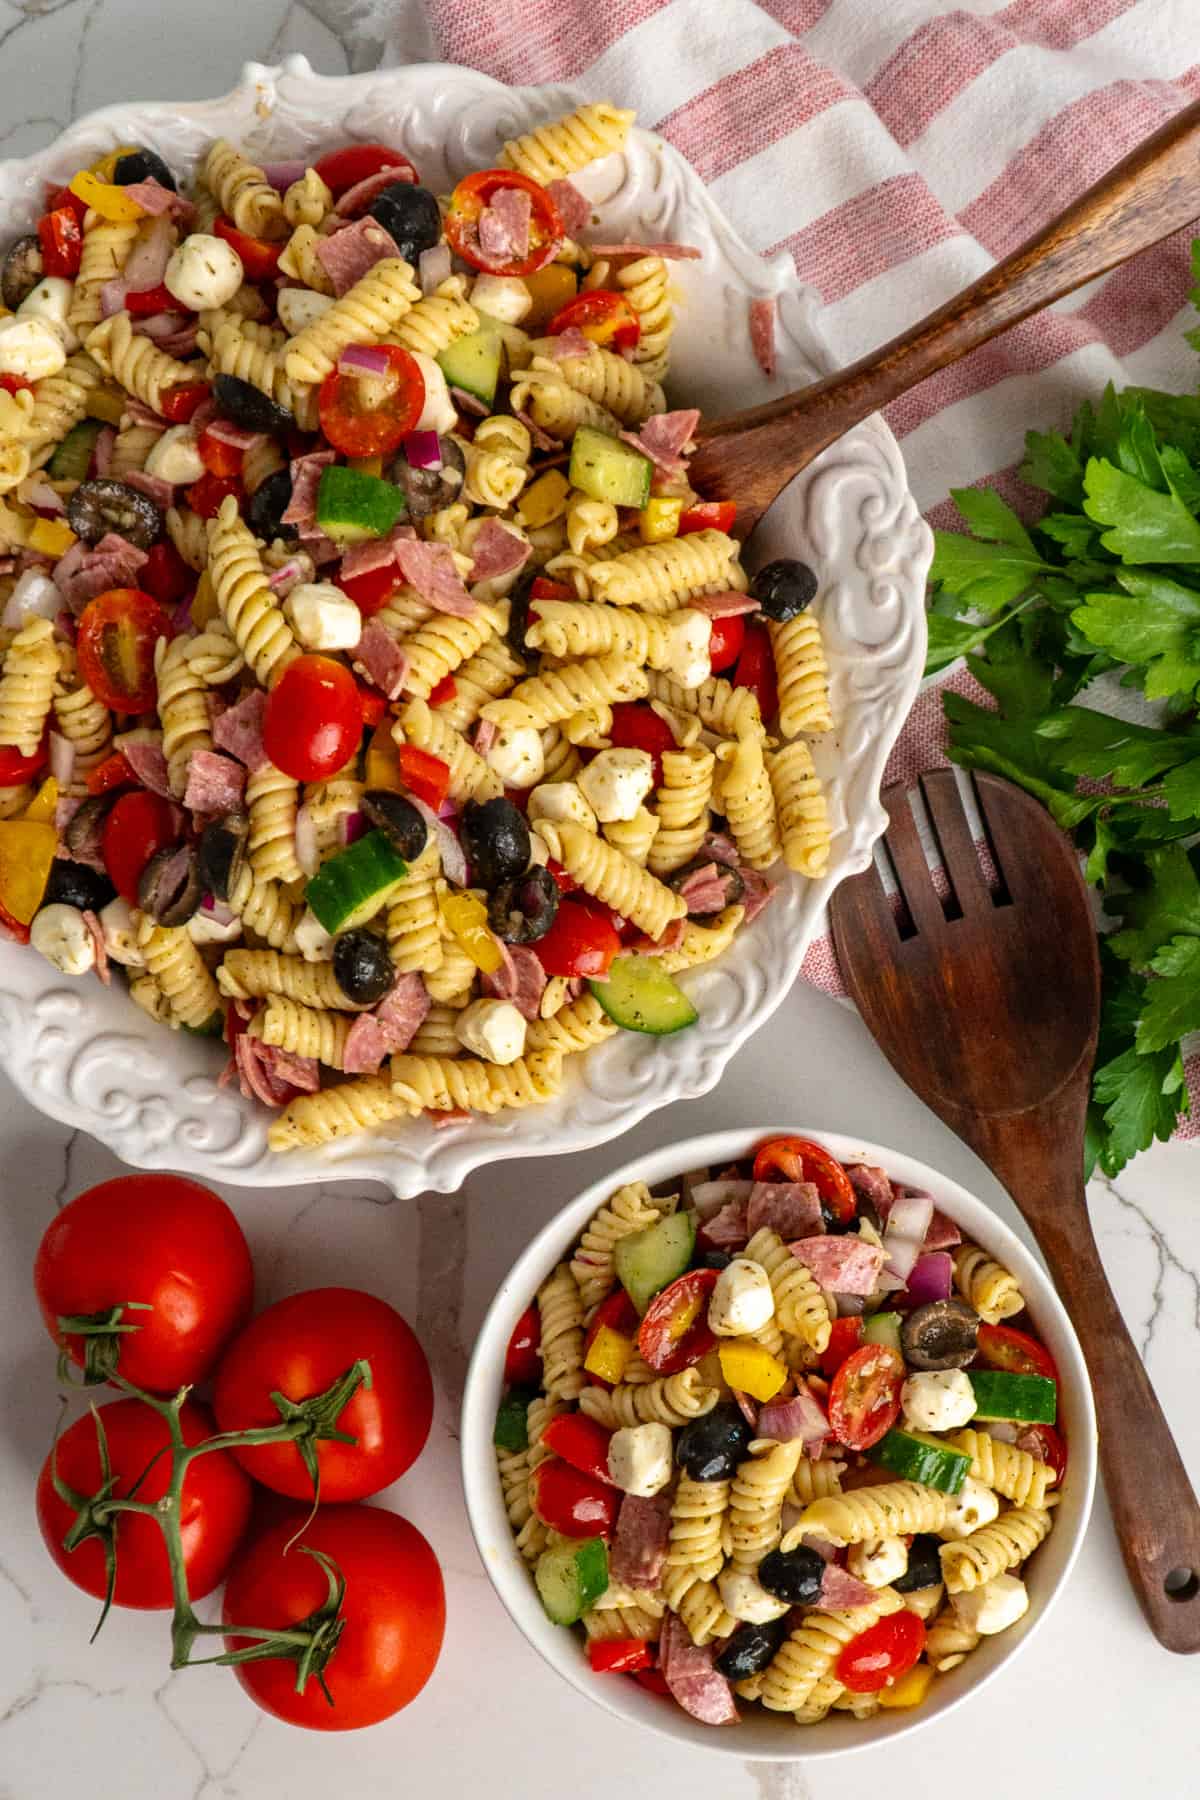 Italian pasta salad in a small bowl and a big bowl.